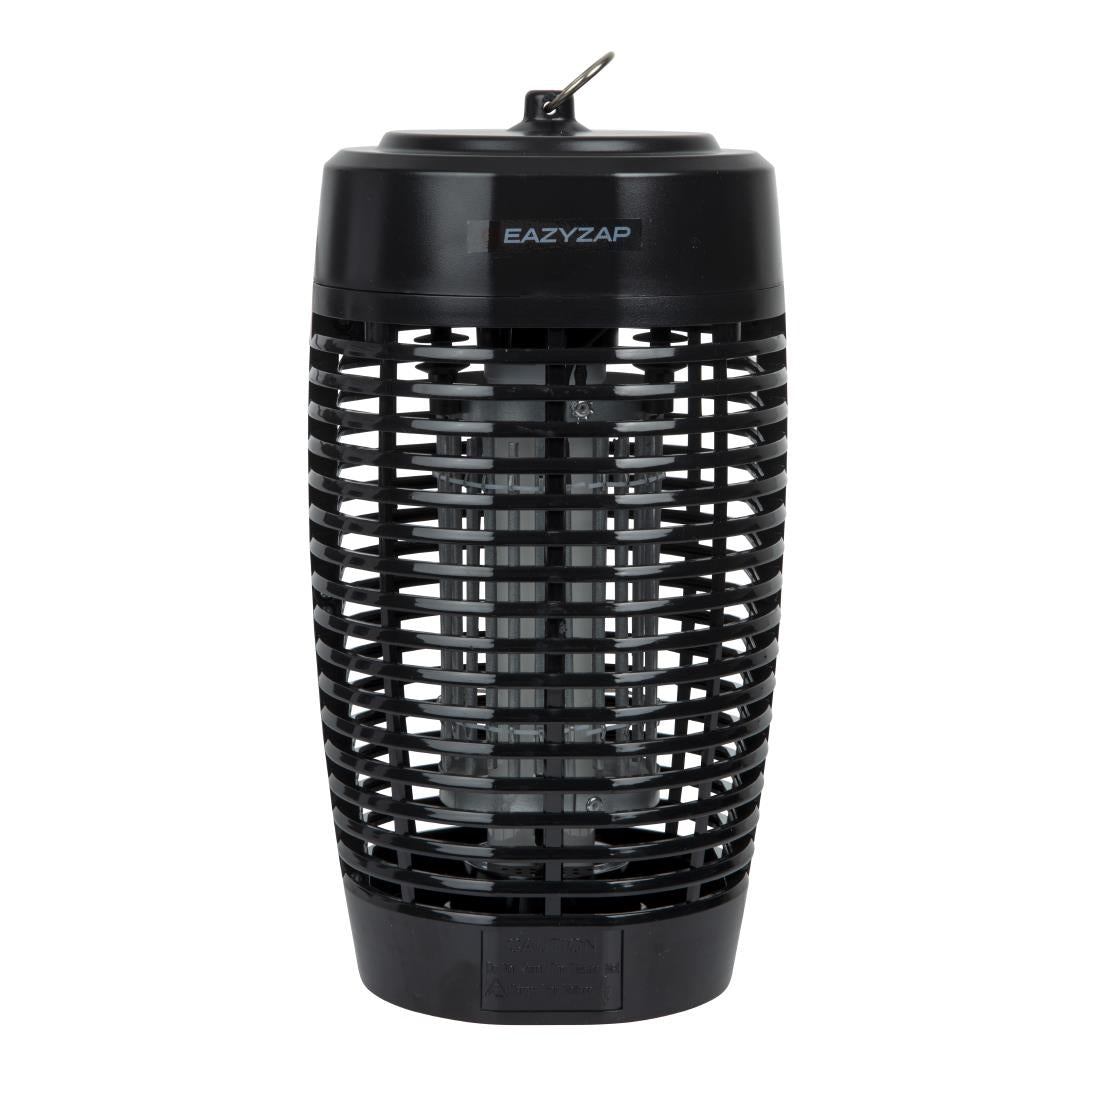 Eazyzap Indoor and Outdoor Lantern Insect Killer.Product Ref:00704.Model:DF756. 🚚 3-5 Days Delivery